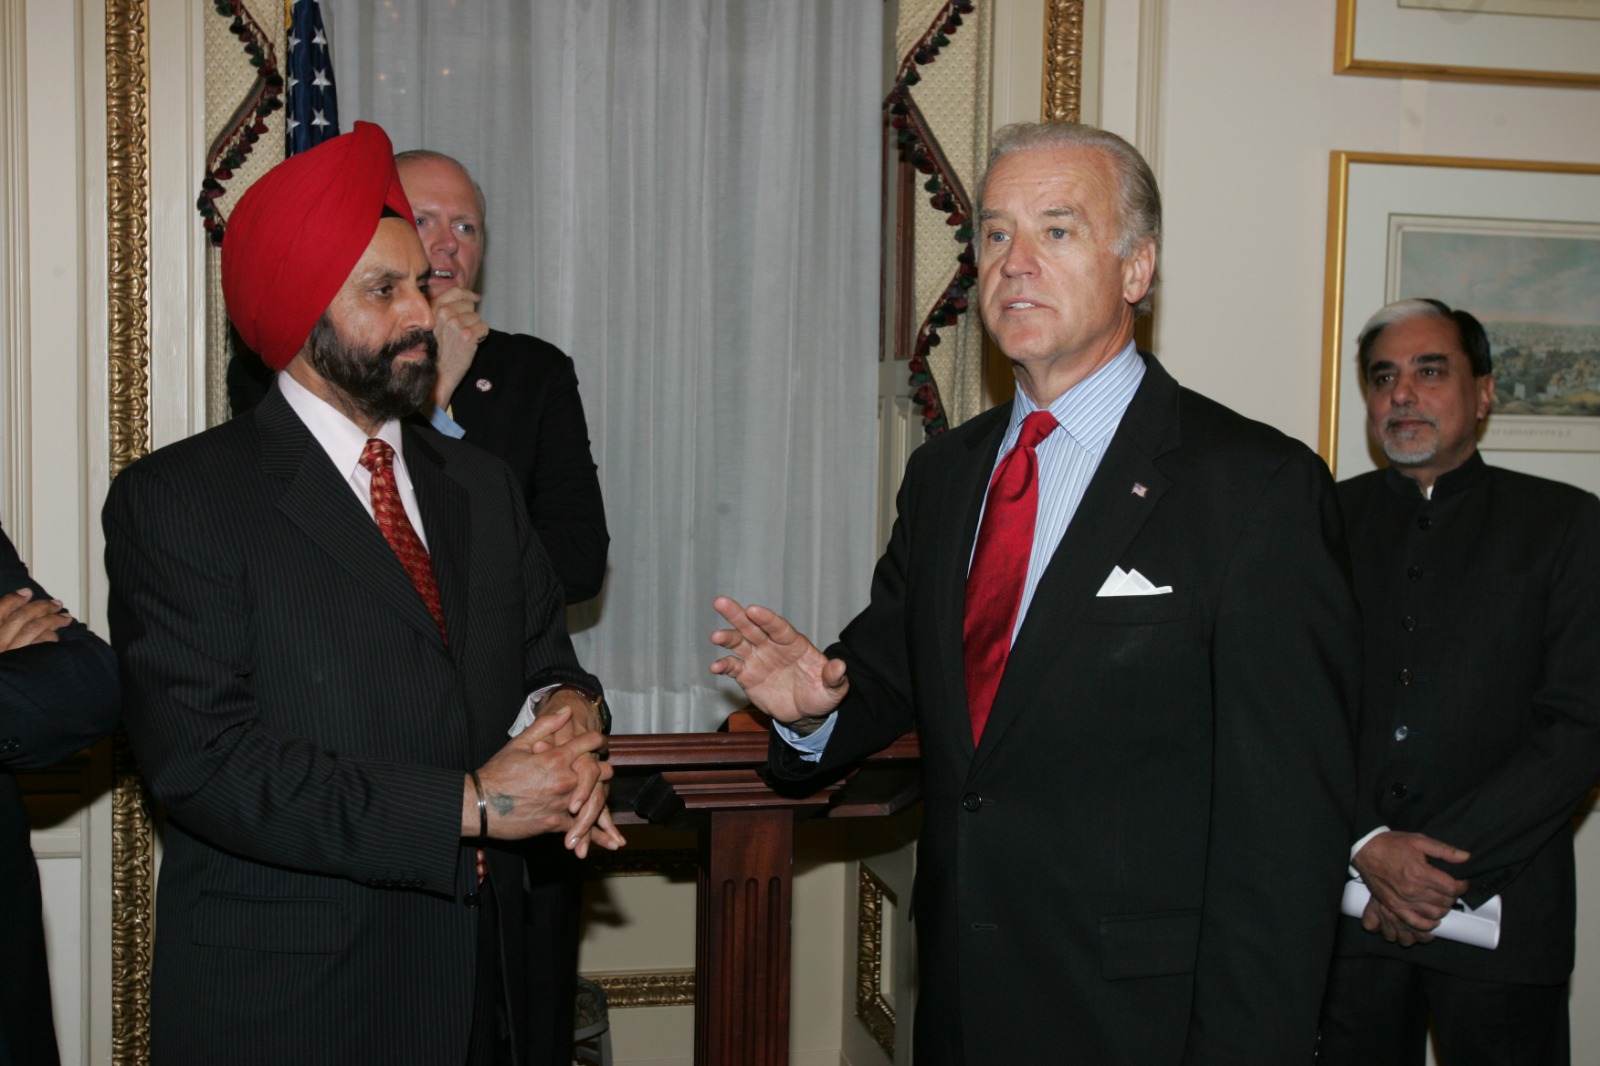 Sant Chatwal says Joe Biden is pro-India, will have much closer relations with the country